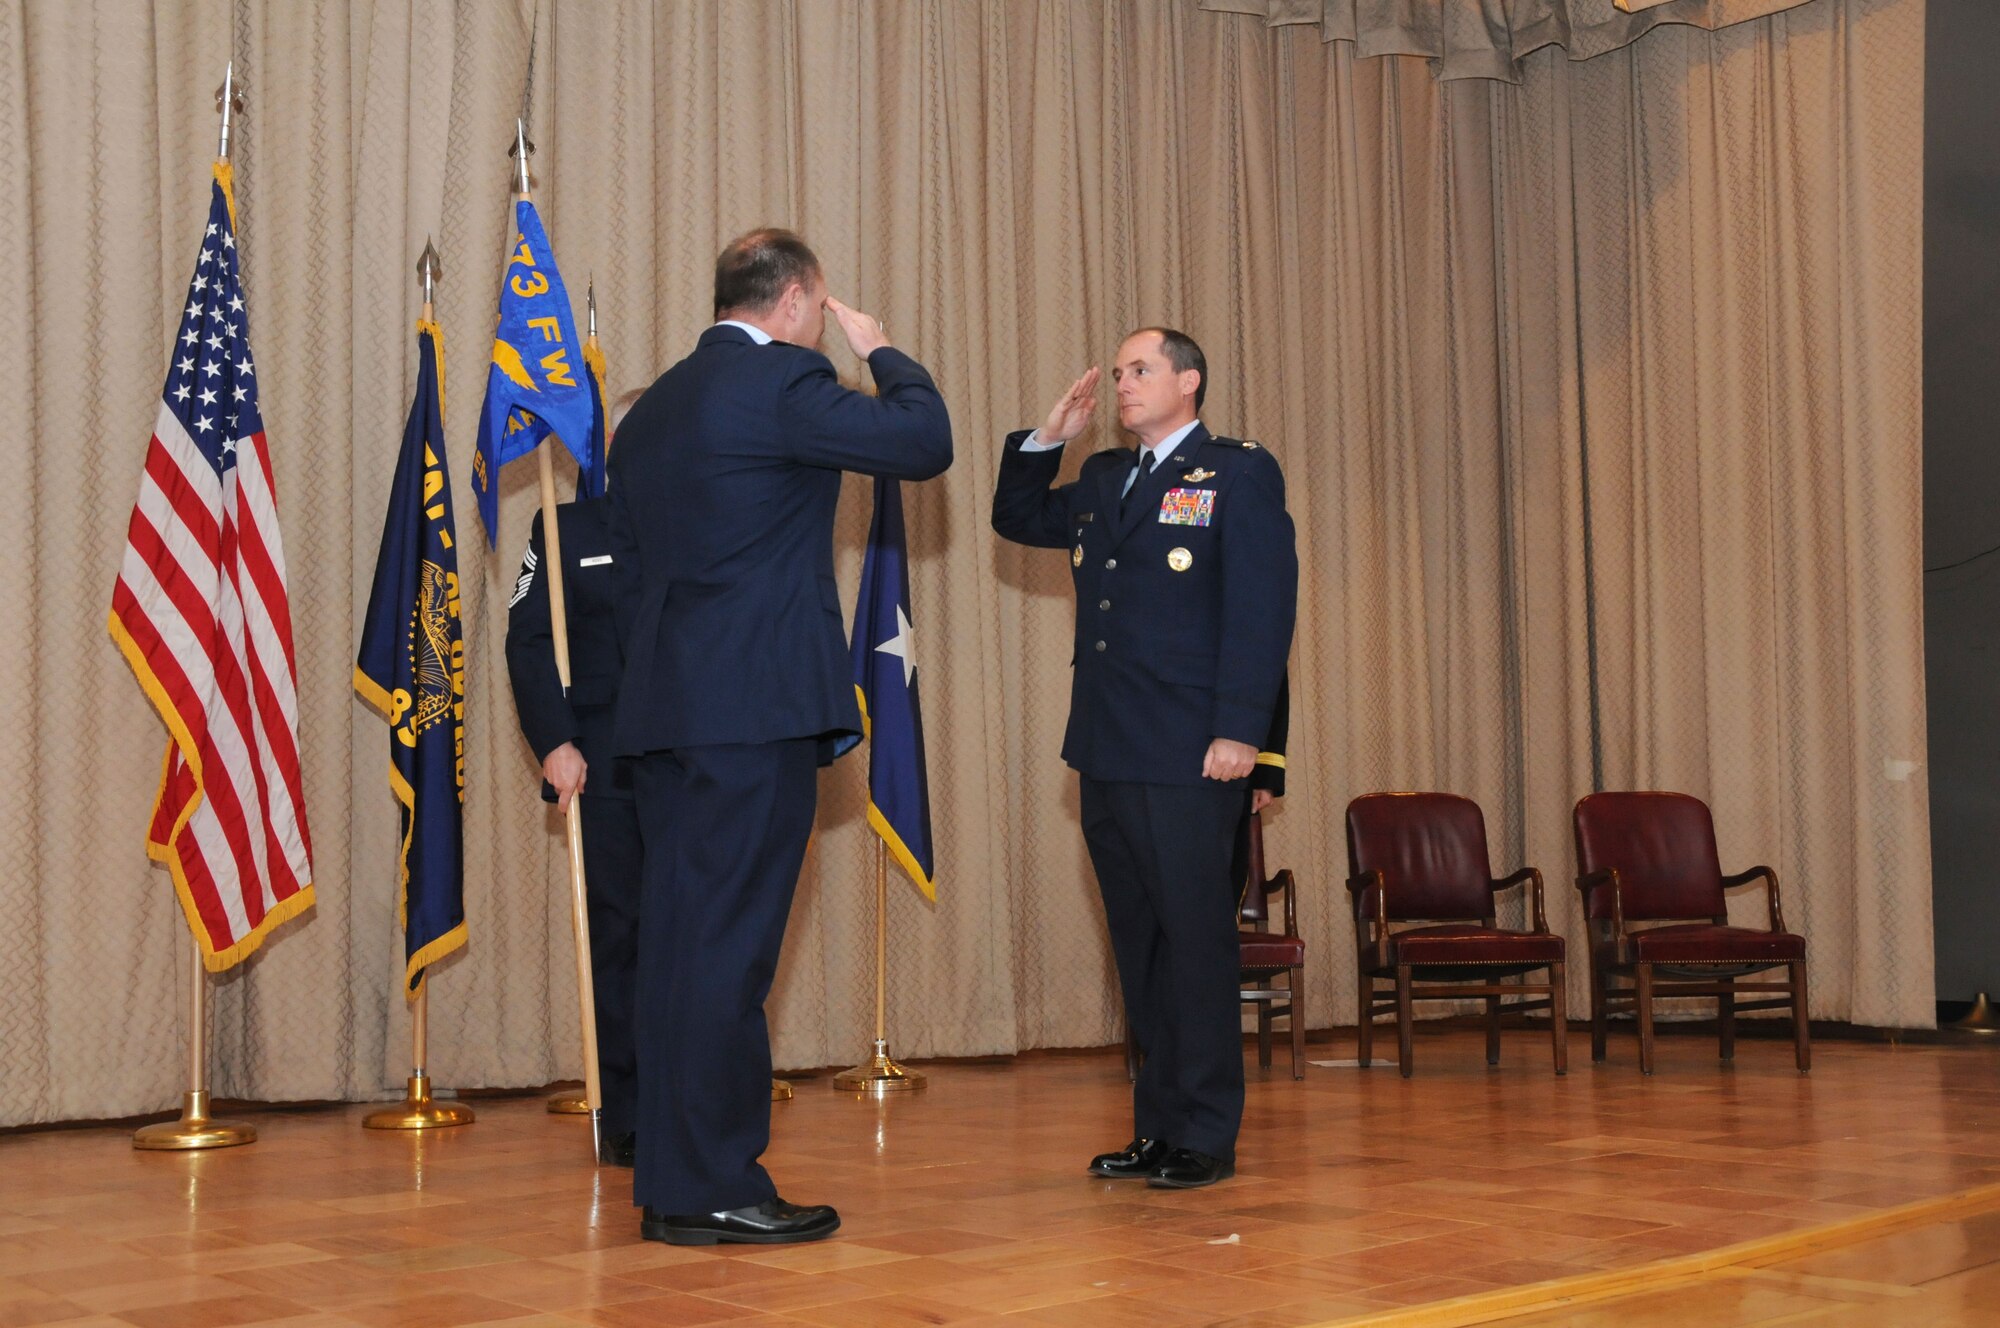 U.S. Air Force Colonel Kirk Pierce, the incoming 173rd Fighter Wing Commander, salutes Brigadier General Michael Stencel, Oregon Air National Guard Commander, presents the during an Assumption of Command ceremony at Kingsley Field, Klamath Falls, Ore. Jan. 10, 2015.  Pierce has 26 years of military service and was previously assigned as the Director of Plans and Programs for the National Guard Bureau. (U.S. Air National Guard photo by Senior Airman Penny Snoozy/Released)